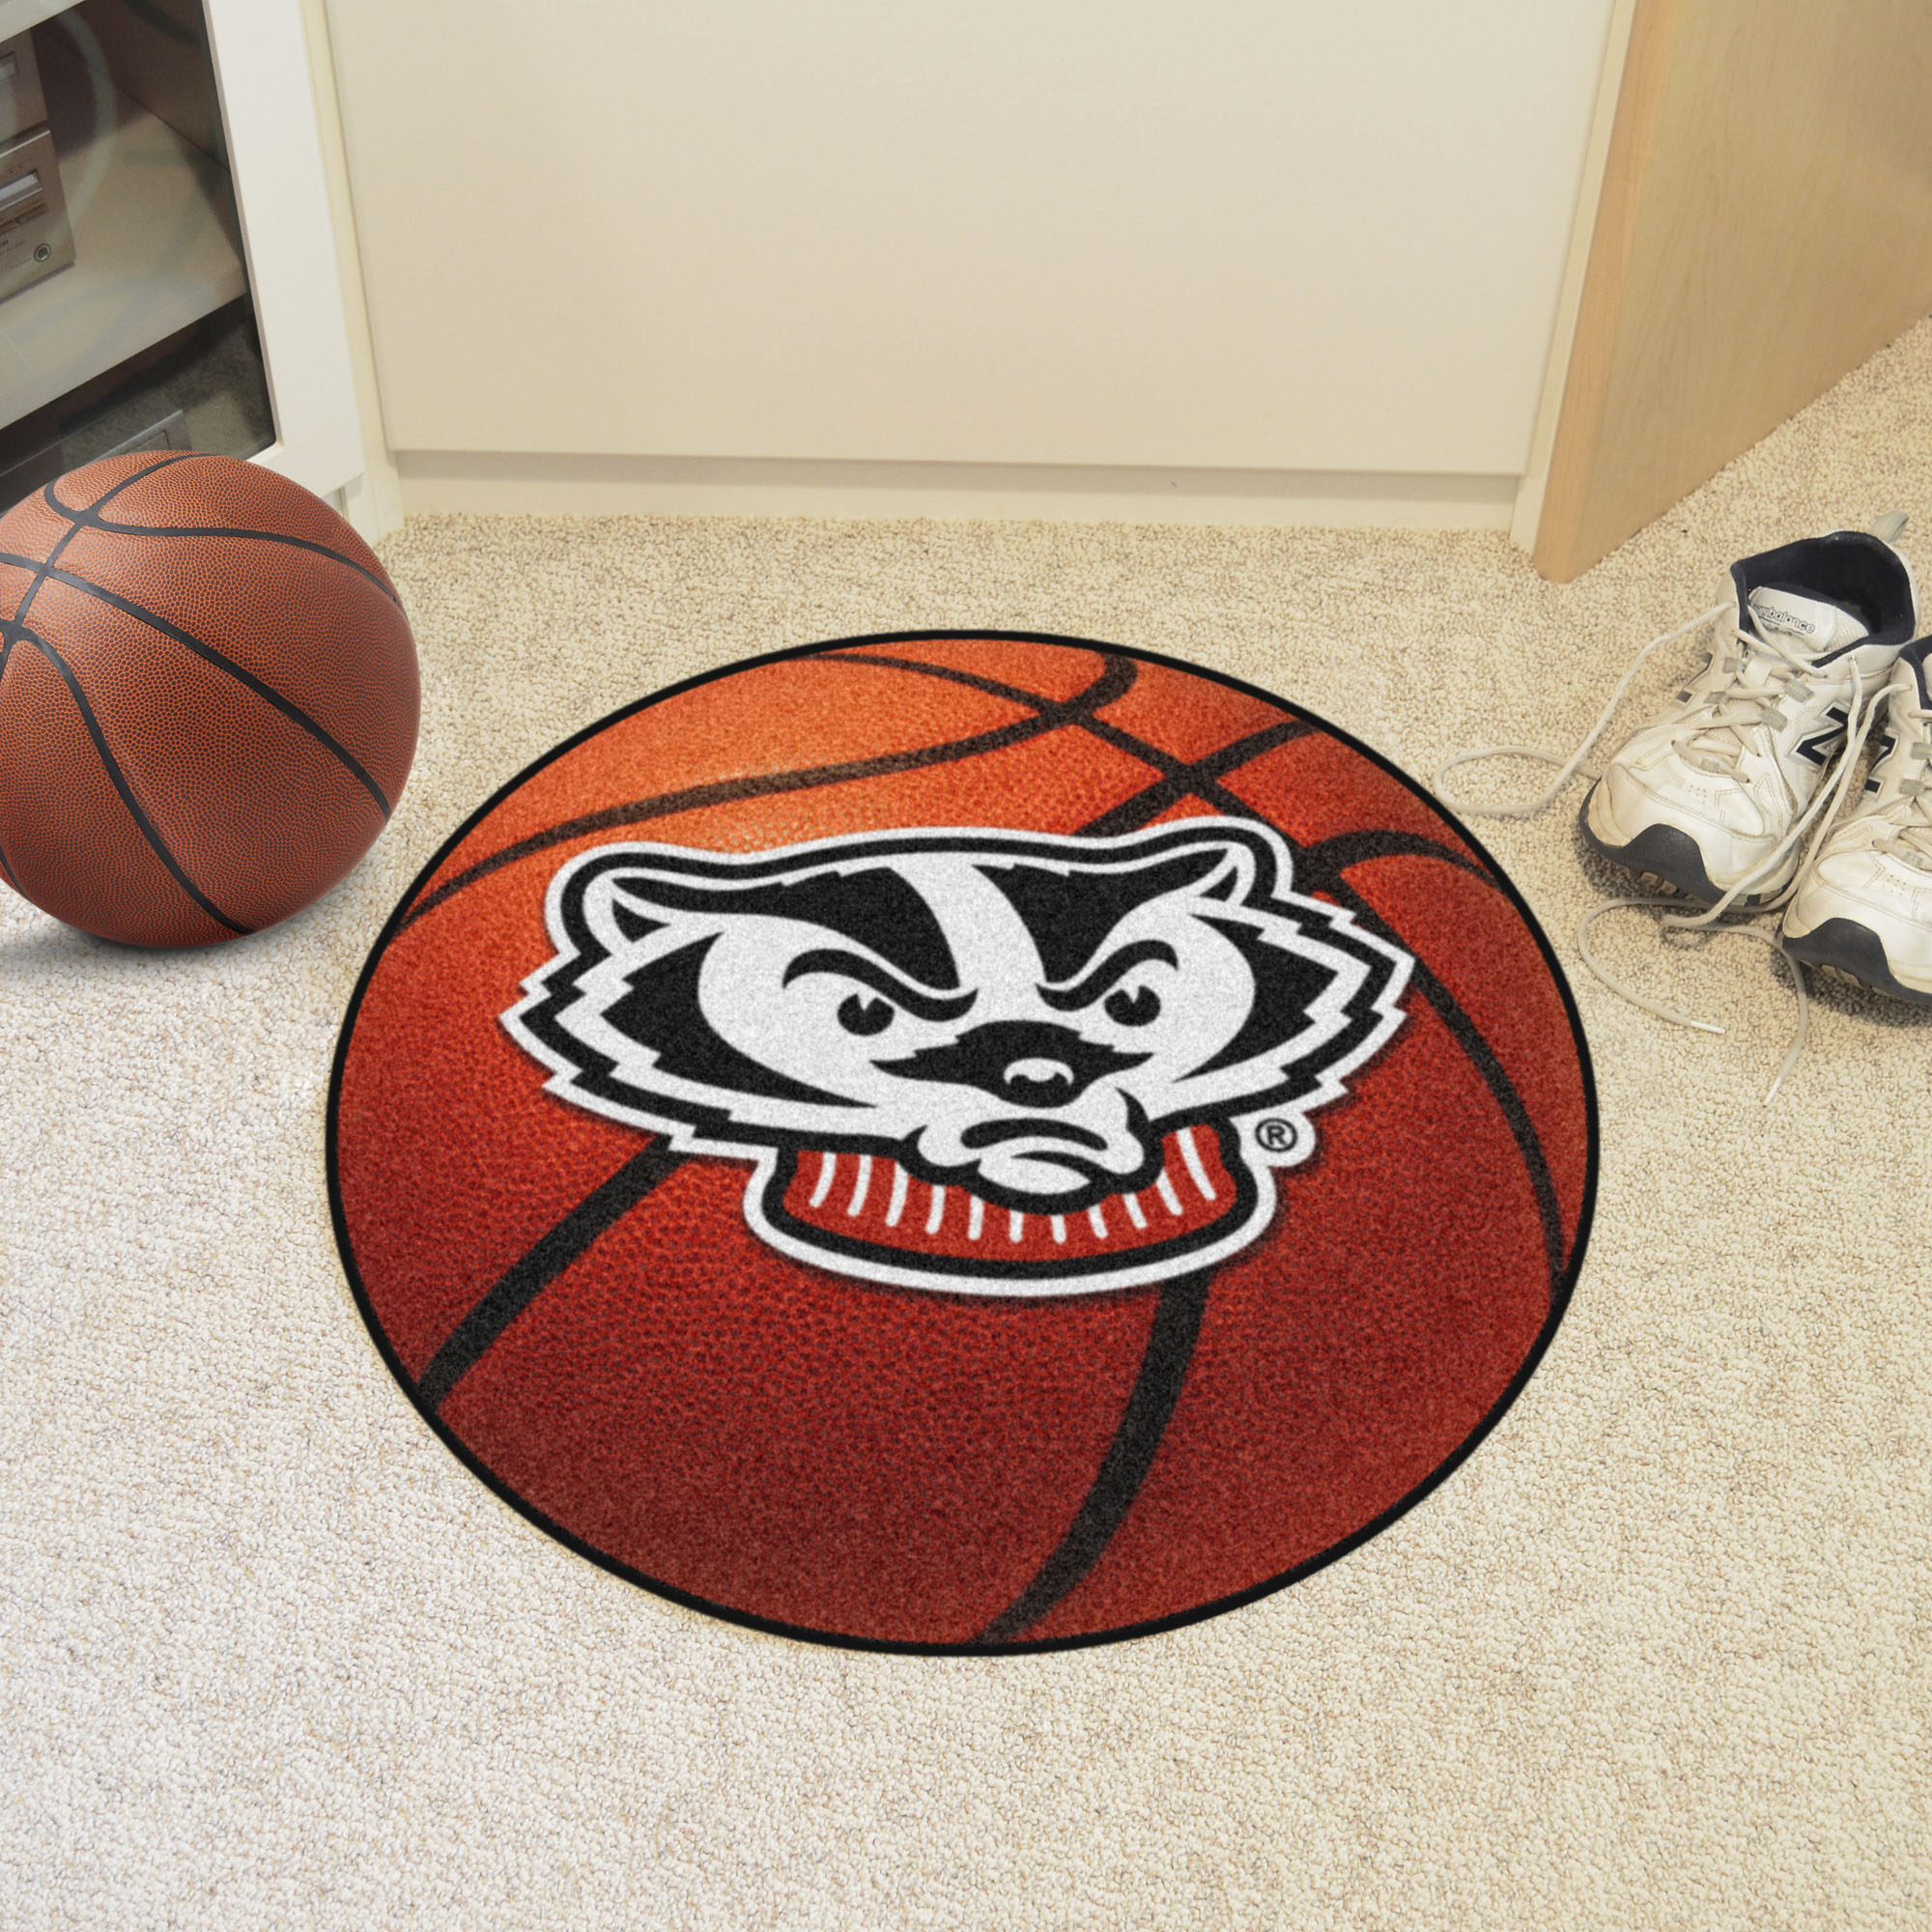 Wisconsin Badgers Ball Shaped Area Rugs (Ball Shaped Area Rugs: Basketball)